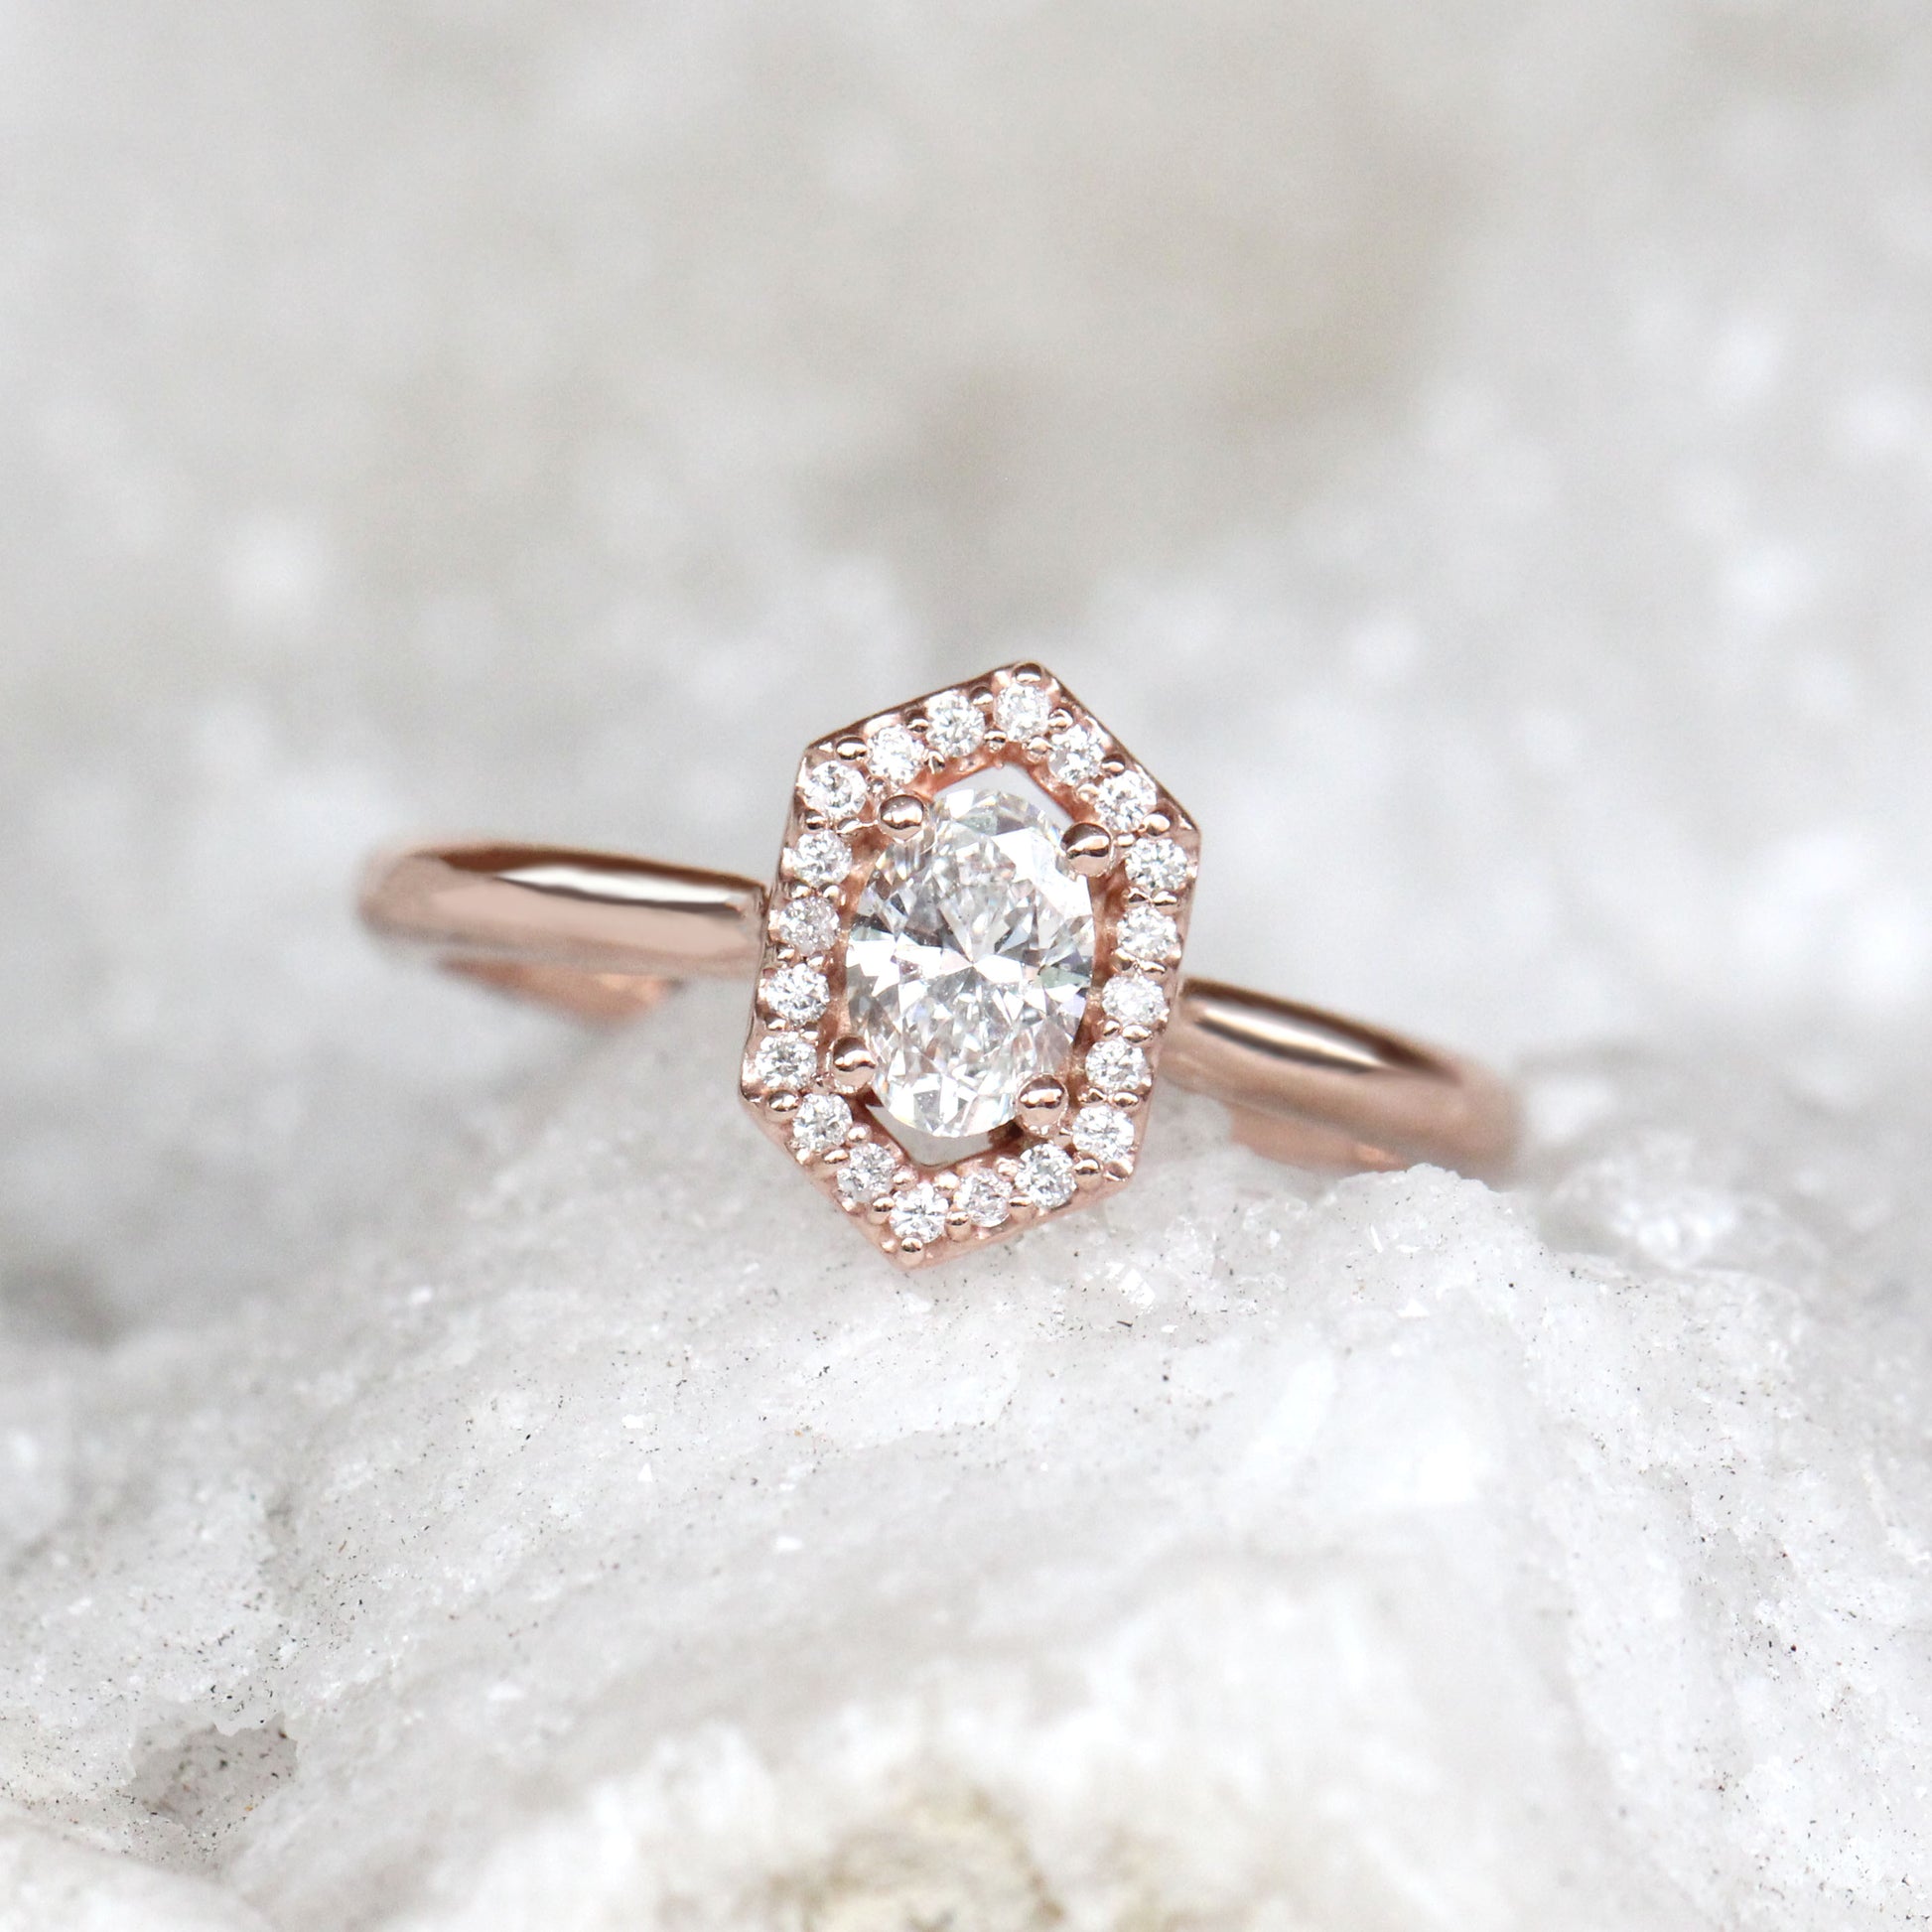 CAELEN Etta Ring with a 0.37 Carat Oval Diamond and Twenty Round White Accent Diamonds in 10k Rose Gold - Ready to Size and Ship - Midwinter Co. Alternative Bridal Rings and Modern Fine Jewelry